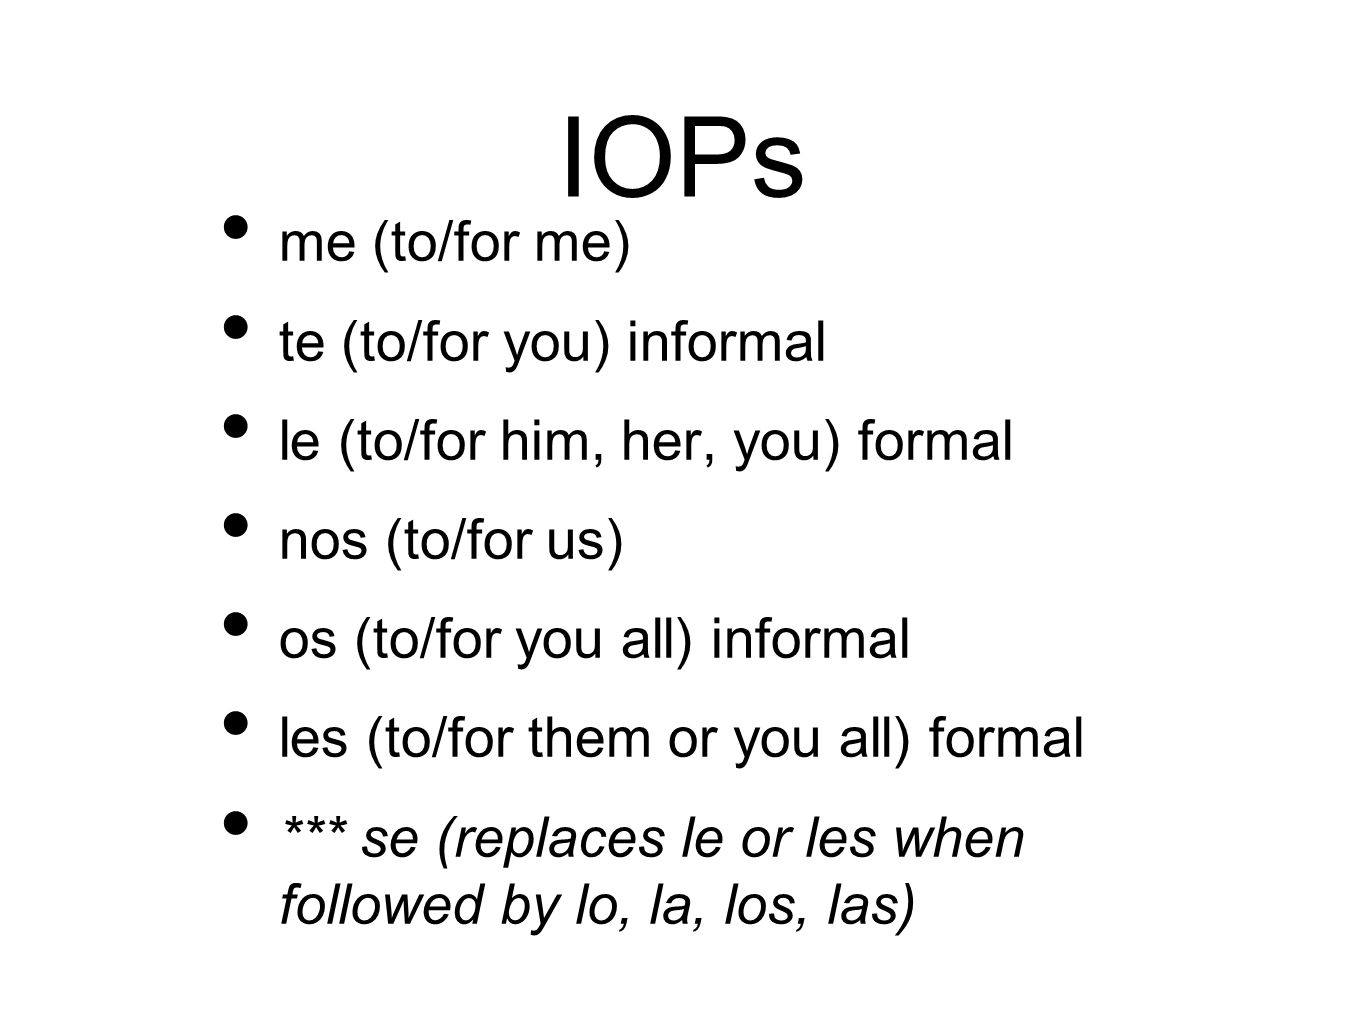 IOPs me (to/for me) te (to/for you) informal le (to/for him, her, you) formal nos (to/for us) os (to/for you all) informal les (to/for them or you all) formal *** se (replaces le or les when followed by lo, la, los, las)